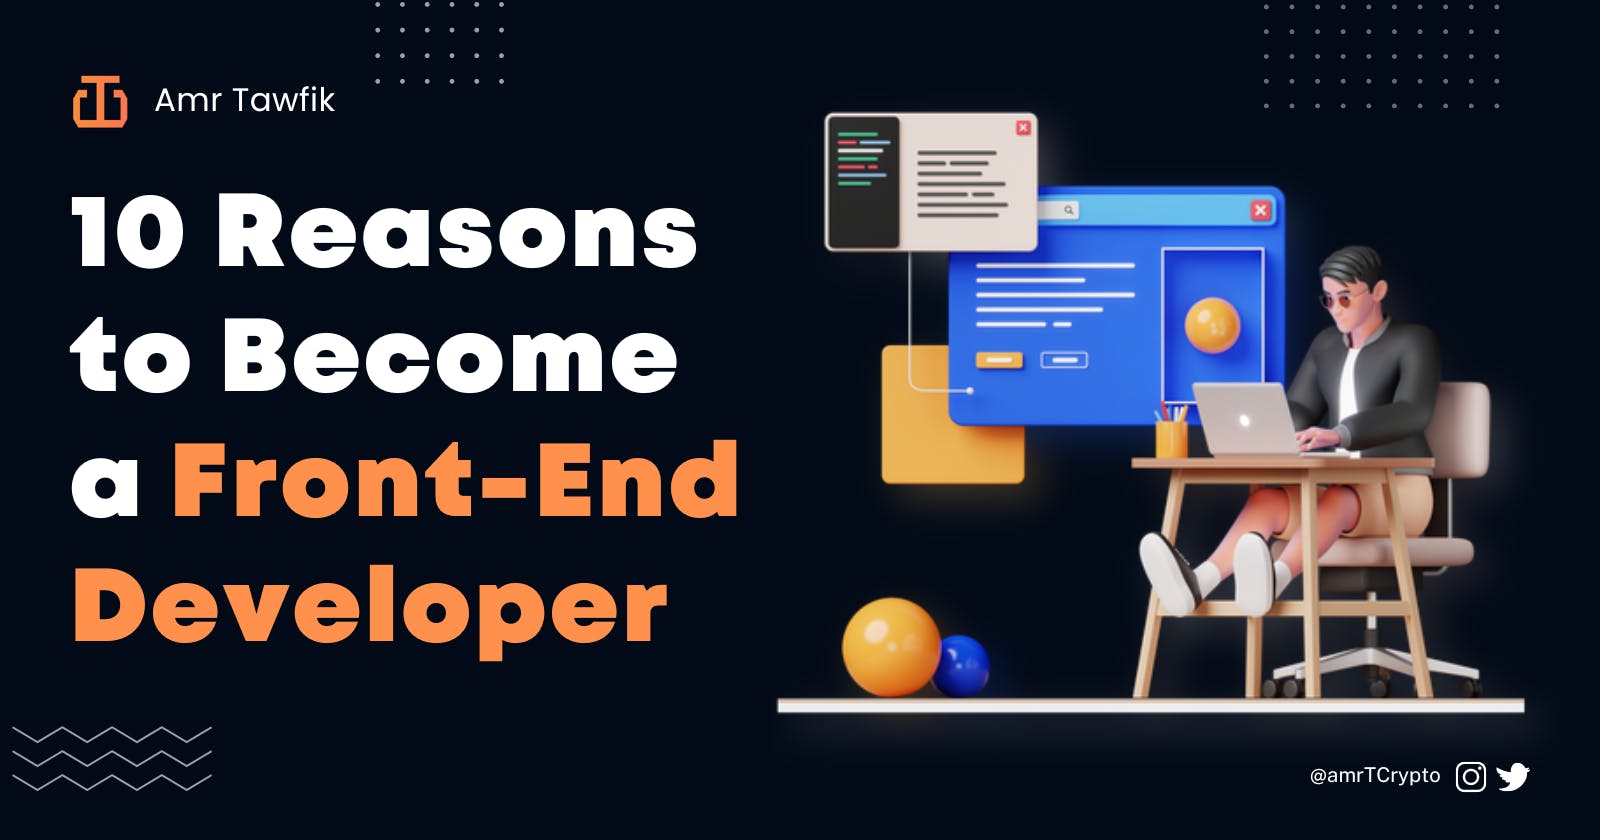 10 Reasons to Become a Front-End Developer